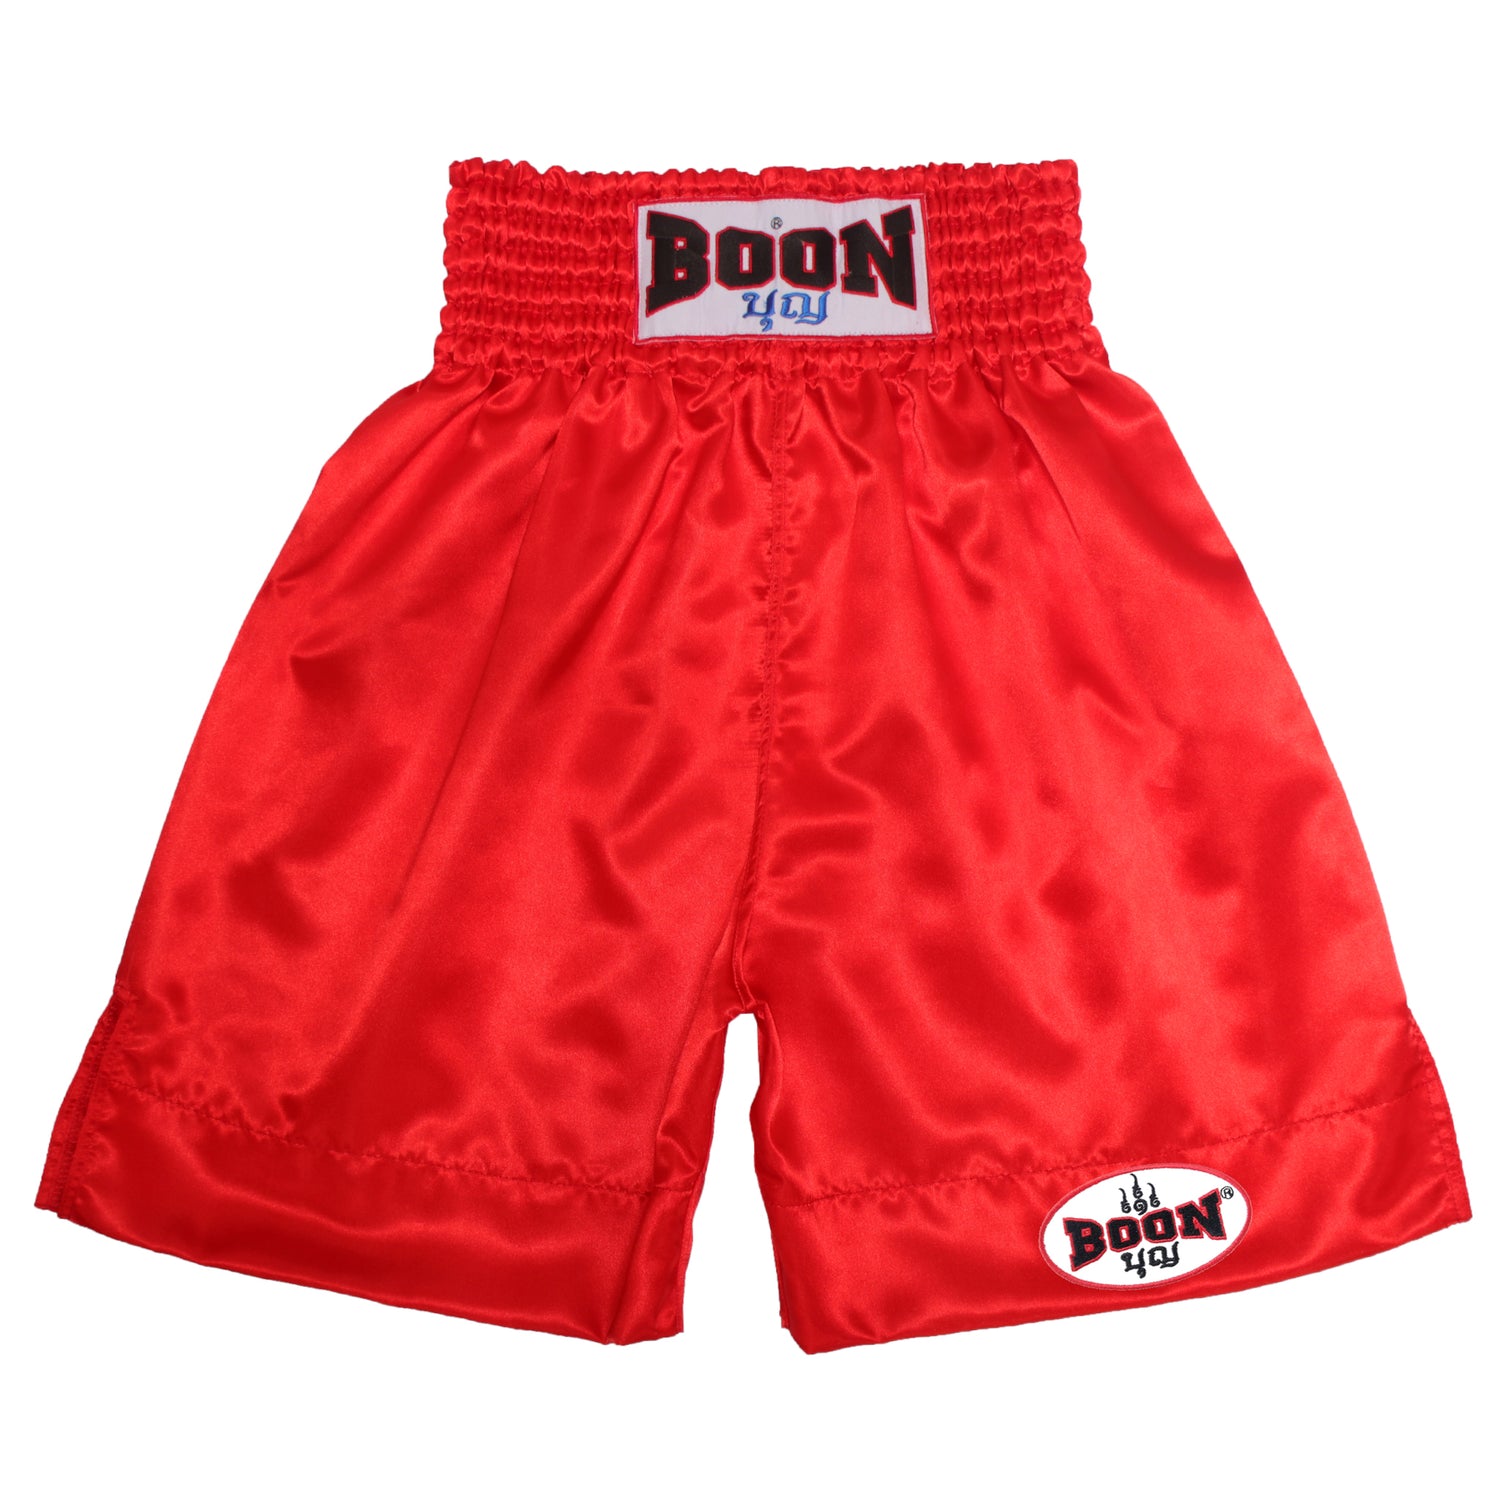 BSR Red boxing shorts